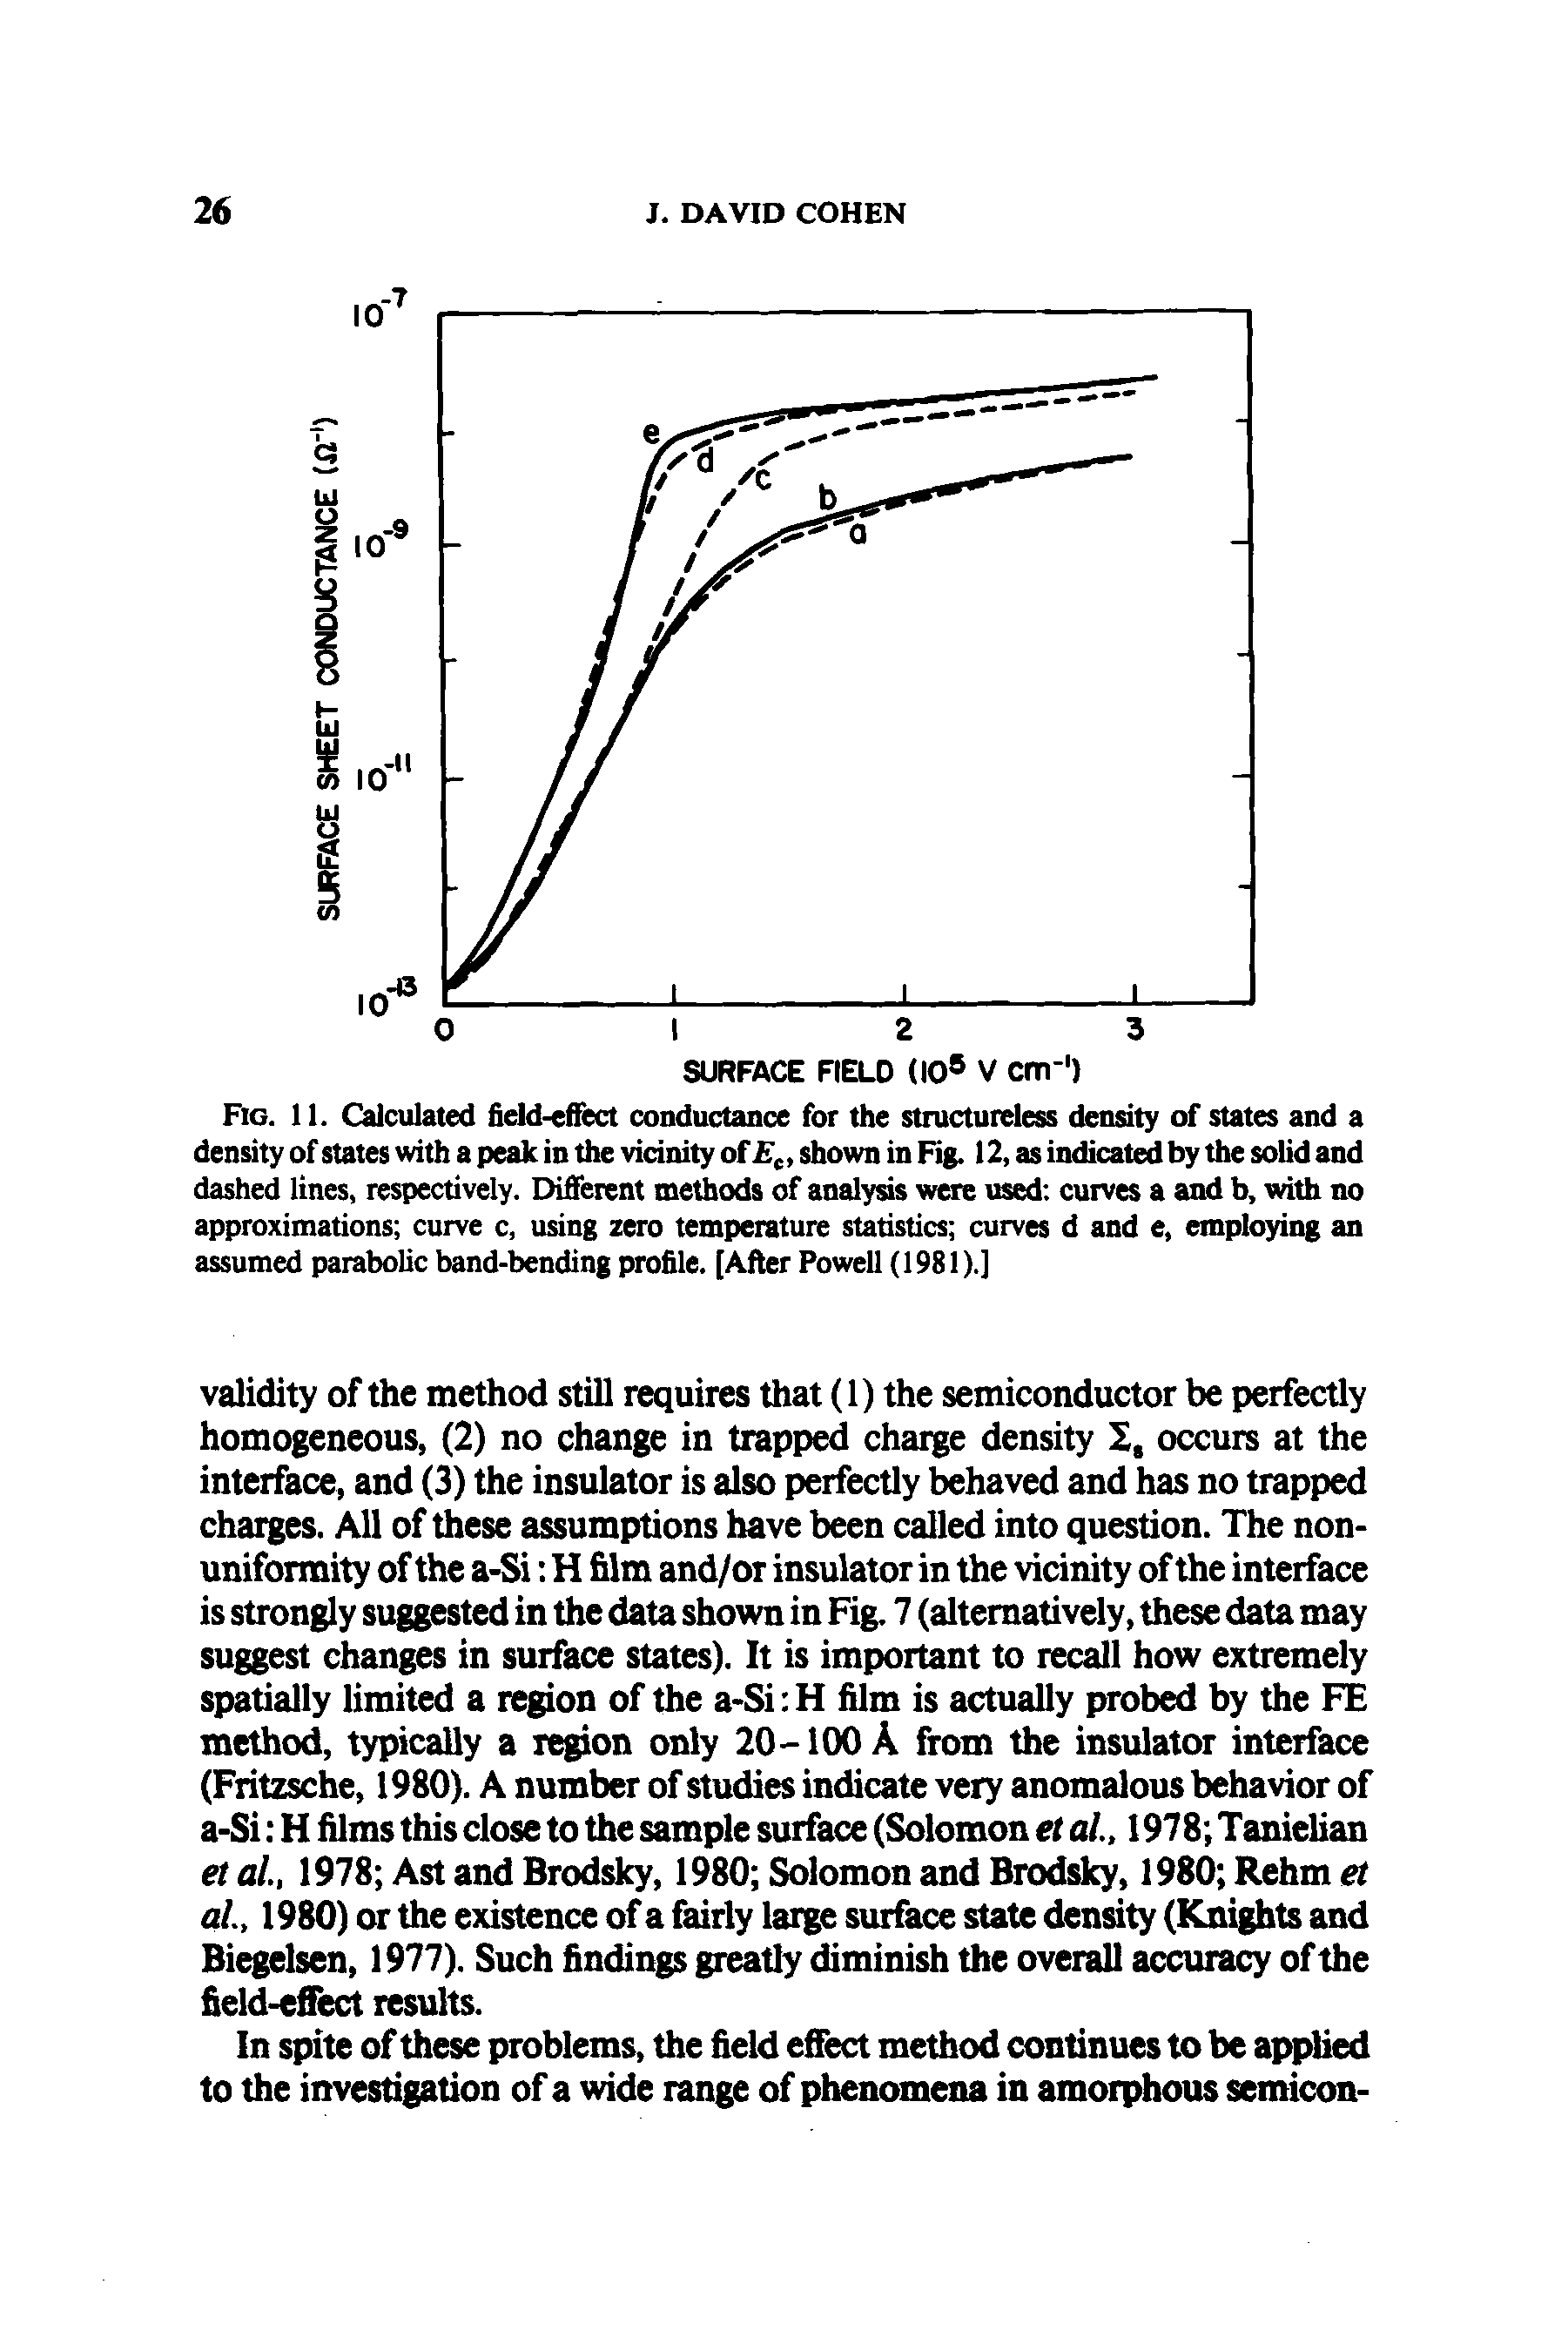 Fig. 11. Calculated field-effect conductance for the structureless density of states and a density of states with a peak in the vicinity of , shown in Fig. 12, as indicated by the solid and dashed lines, respectively. Different mediods of analysis were used curves a and b, with no approximations curve c, using zero temperature statistics curves d and e, employing an assumed parabolic band-bending profile. [After Powell (1981).]...